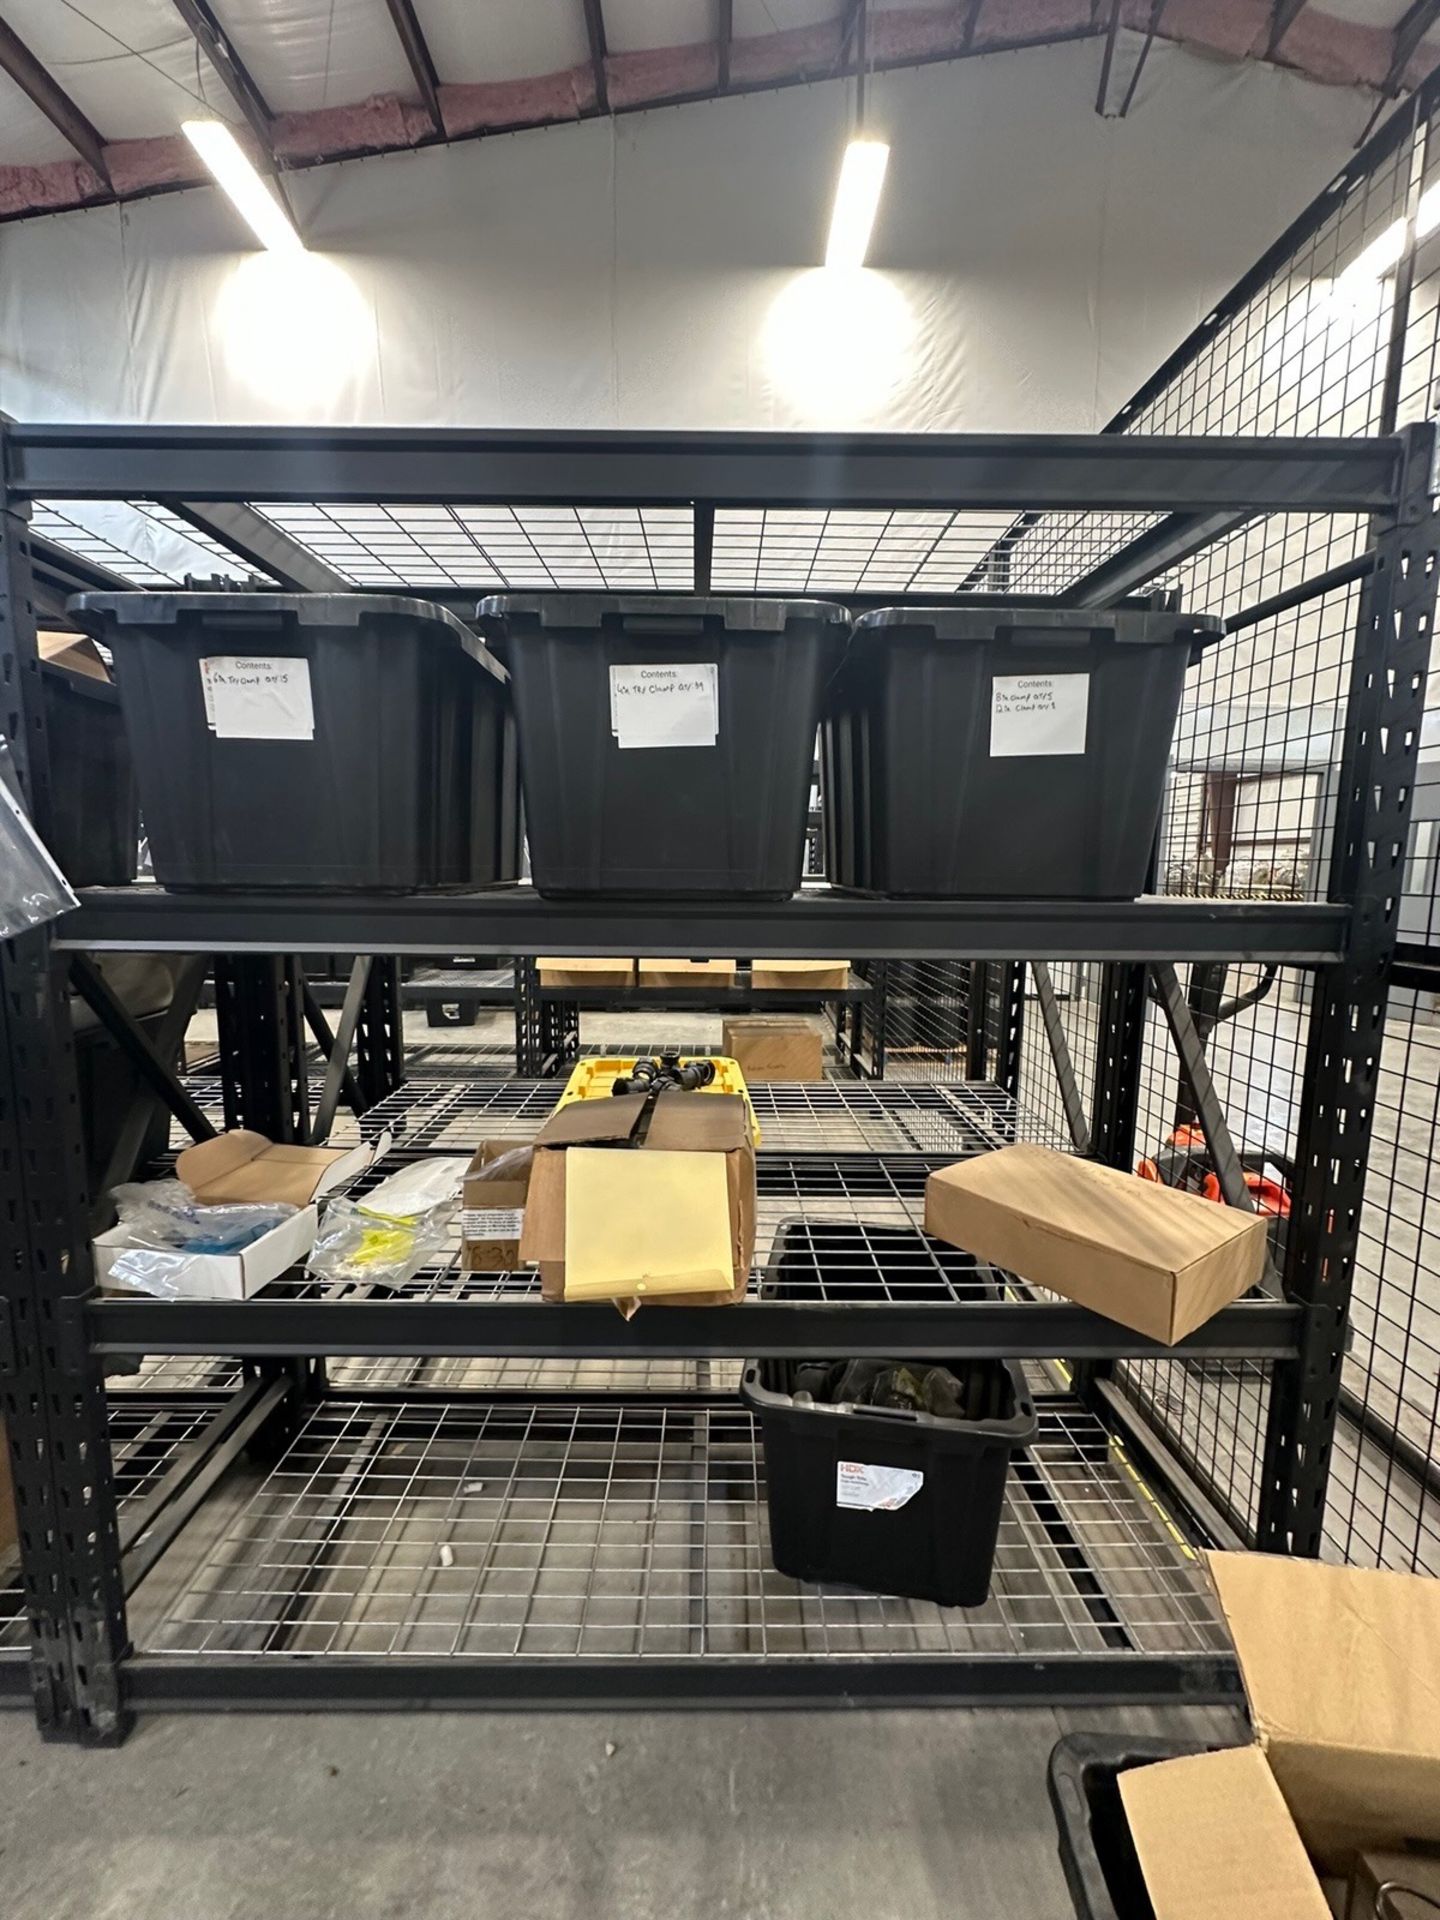 Lot of 10 Shelves No Contents | Rig Fee $375 - Image 3 of 10